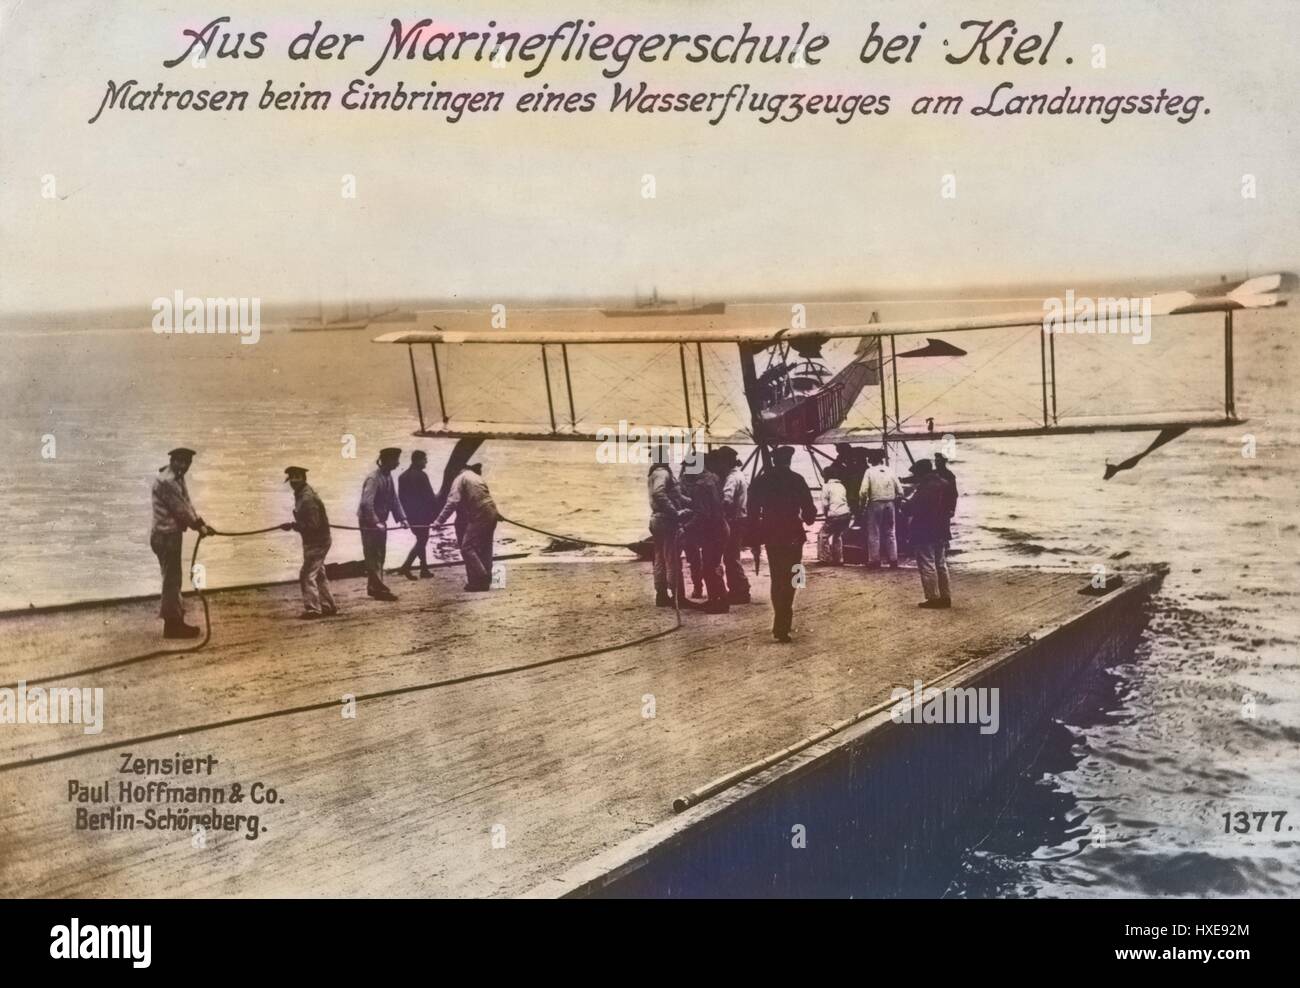 German World War I photographic postcard depicting sailors with a seaplane at the landing stage at a naval flying school near Kiel, Germany, 1915. From the New York Public Library. Note: Image has been digitally colorized using a modern process. Colors may not be period-accurate. Stock Photo